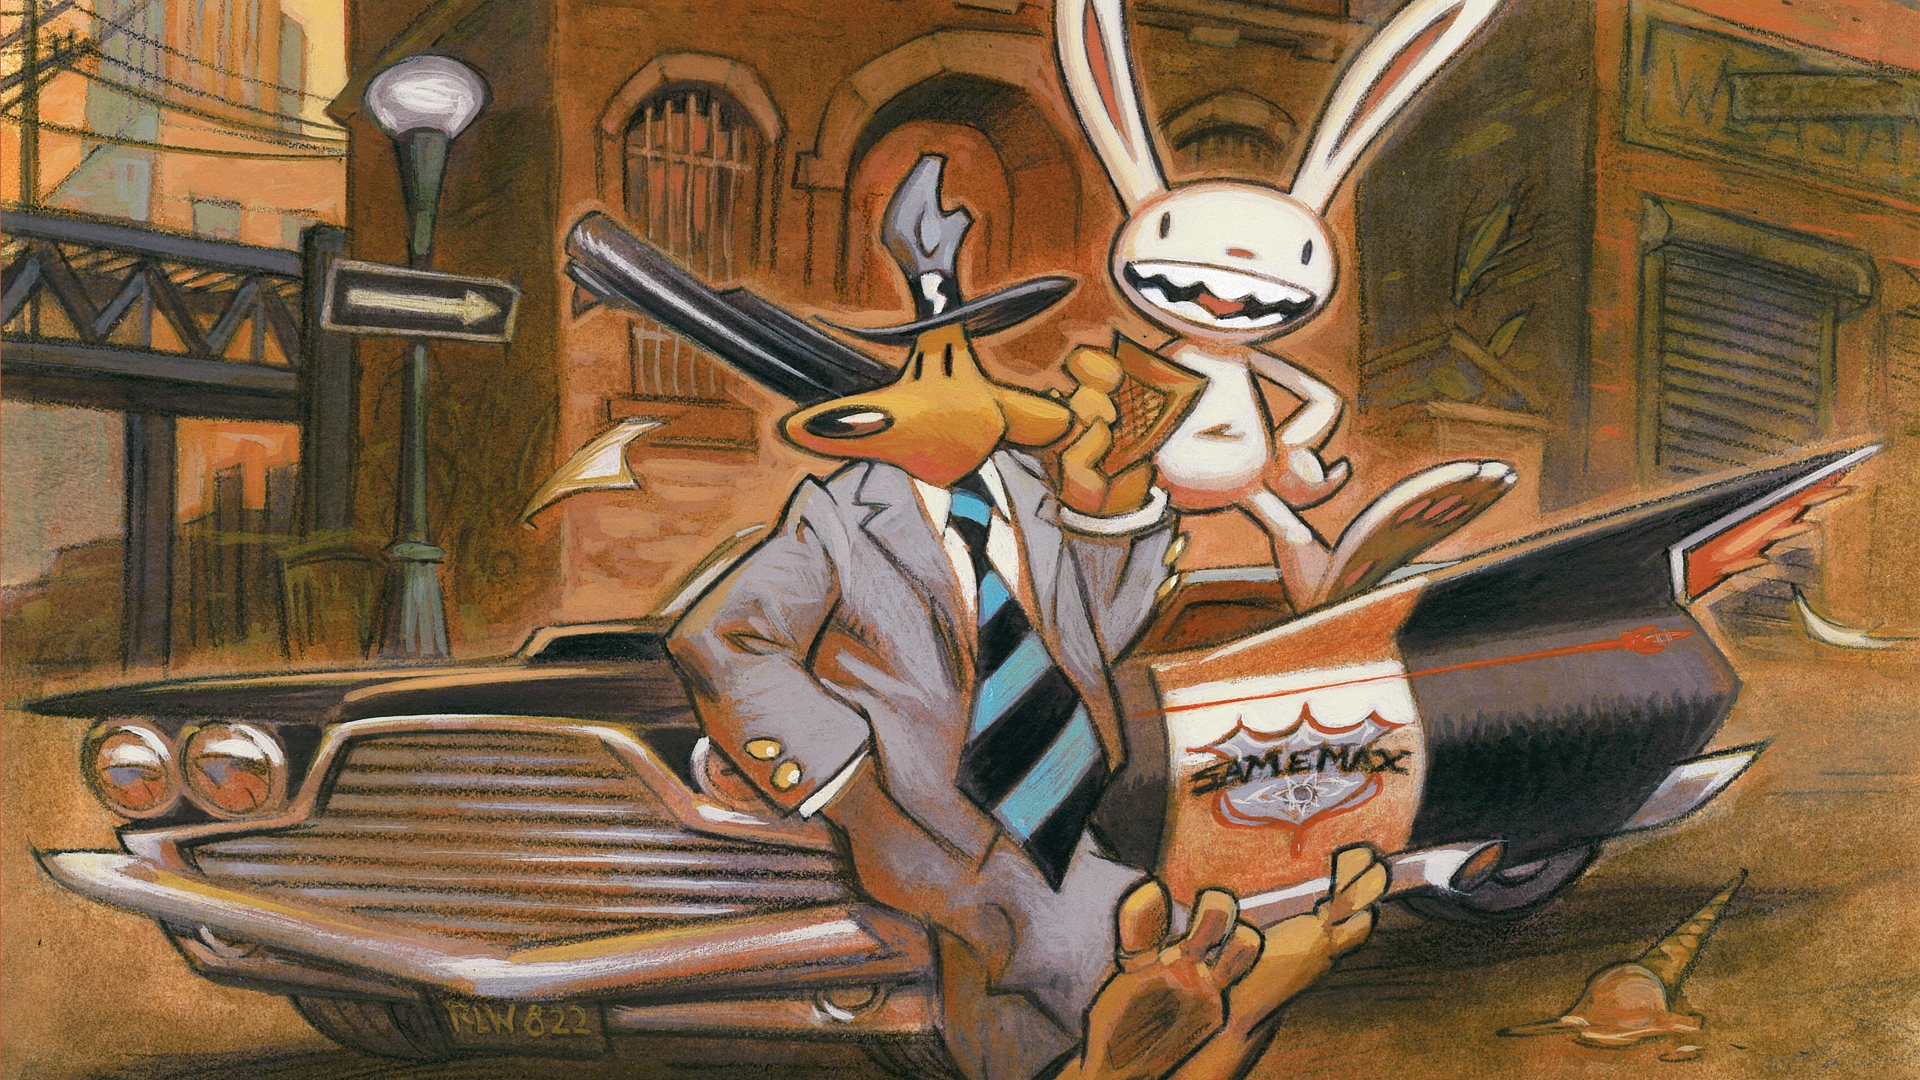 sam-max-hit-the-road-details-launchbox-games-database